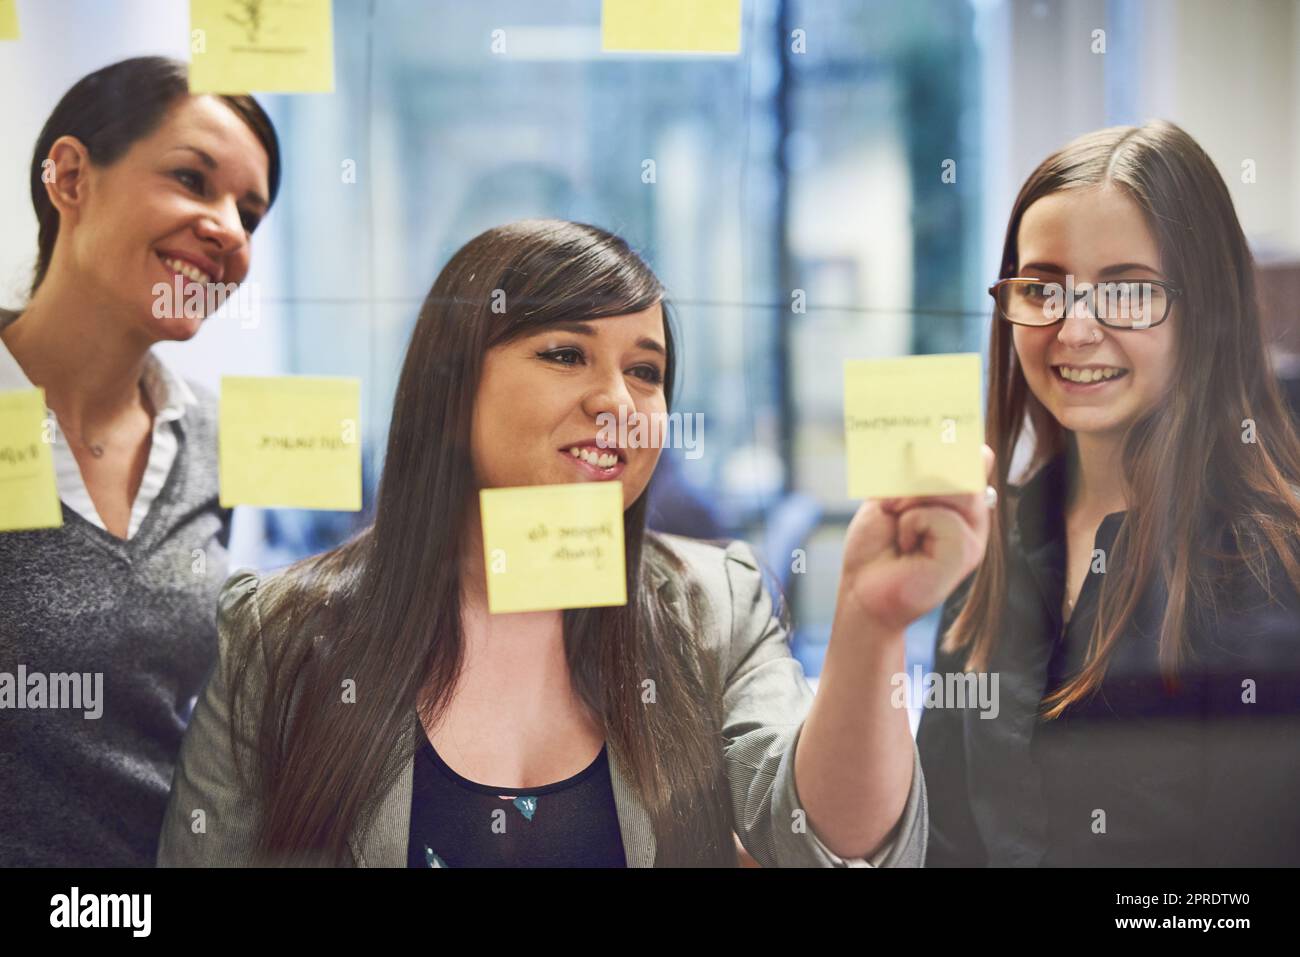 Great ideas makes them happy. a group of businesswomen brainstorming on a glass wall in an office. Stock Photo